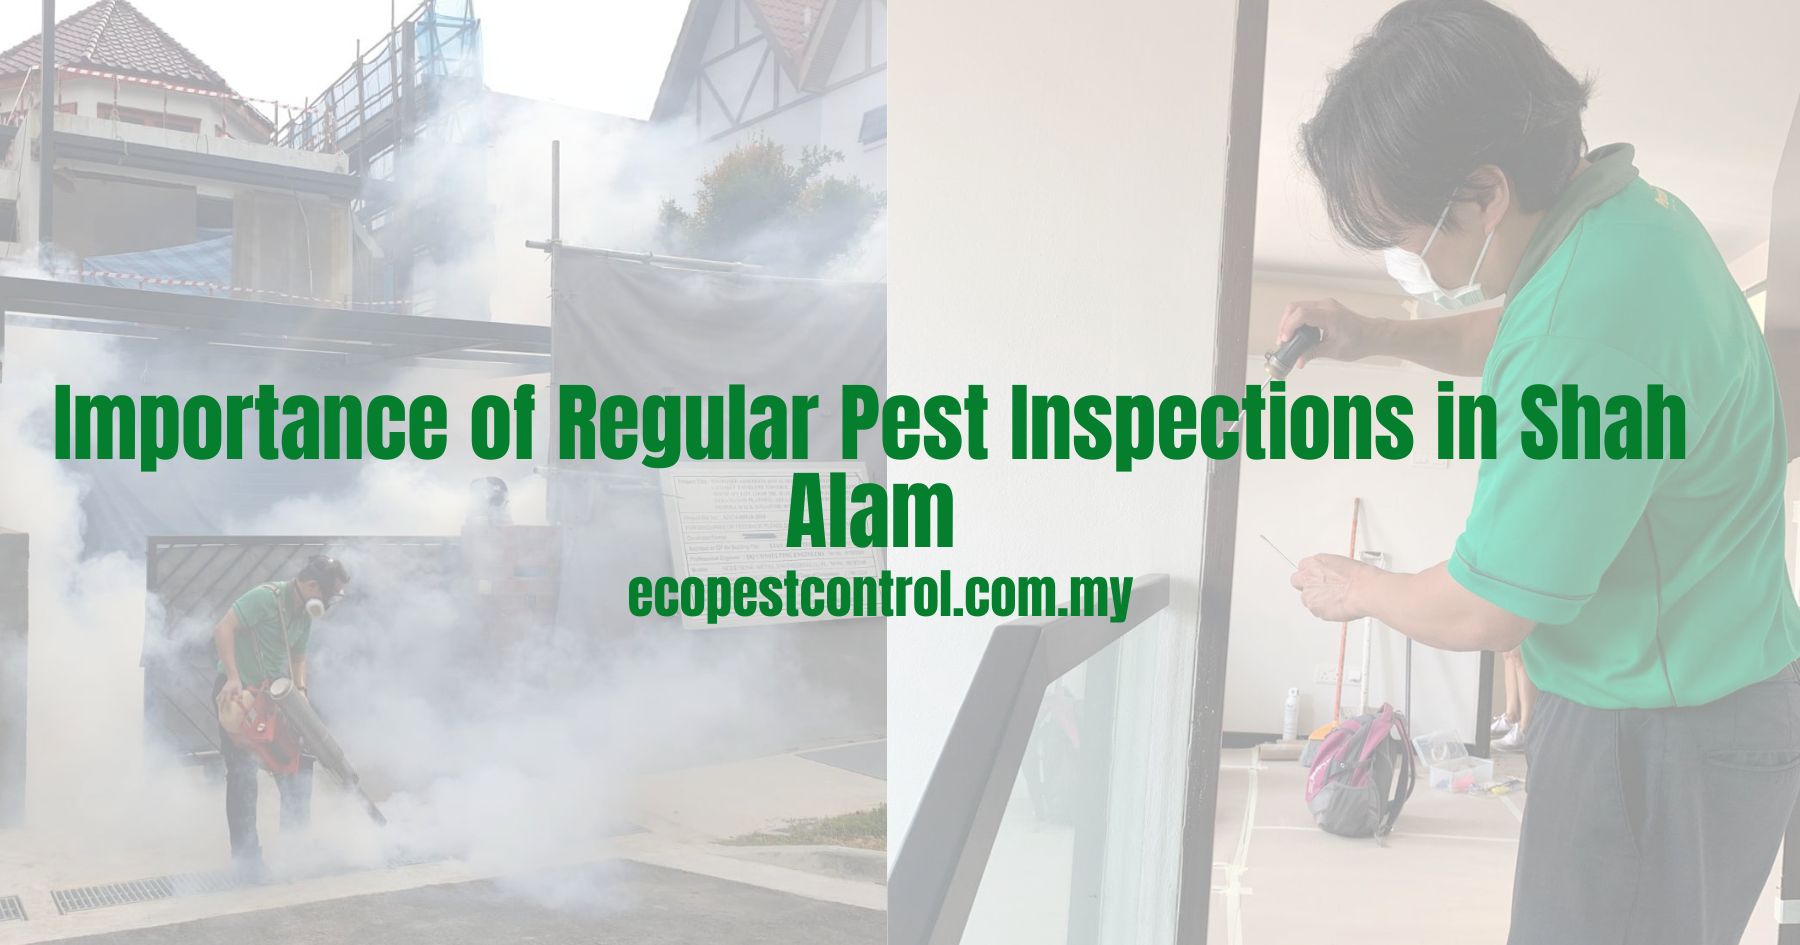 Importance of Regular Pest Inspections in Shah Alam